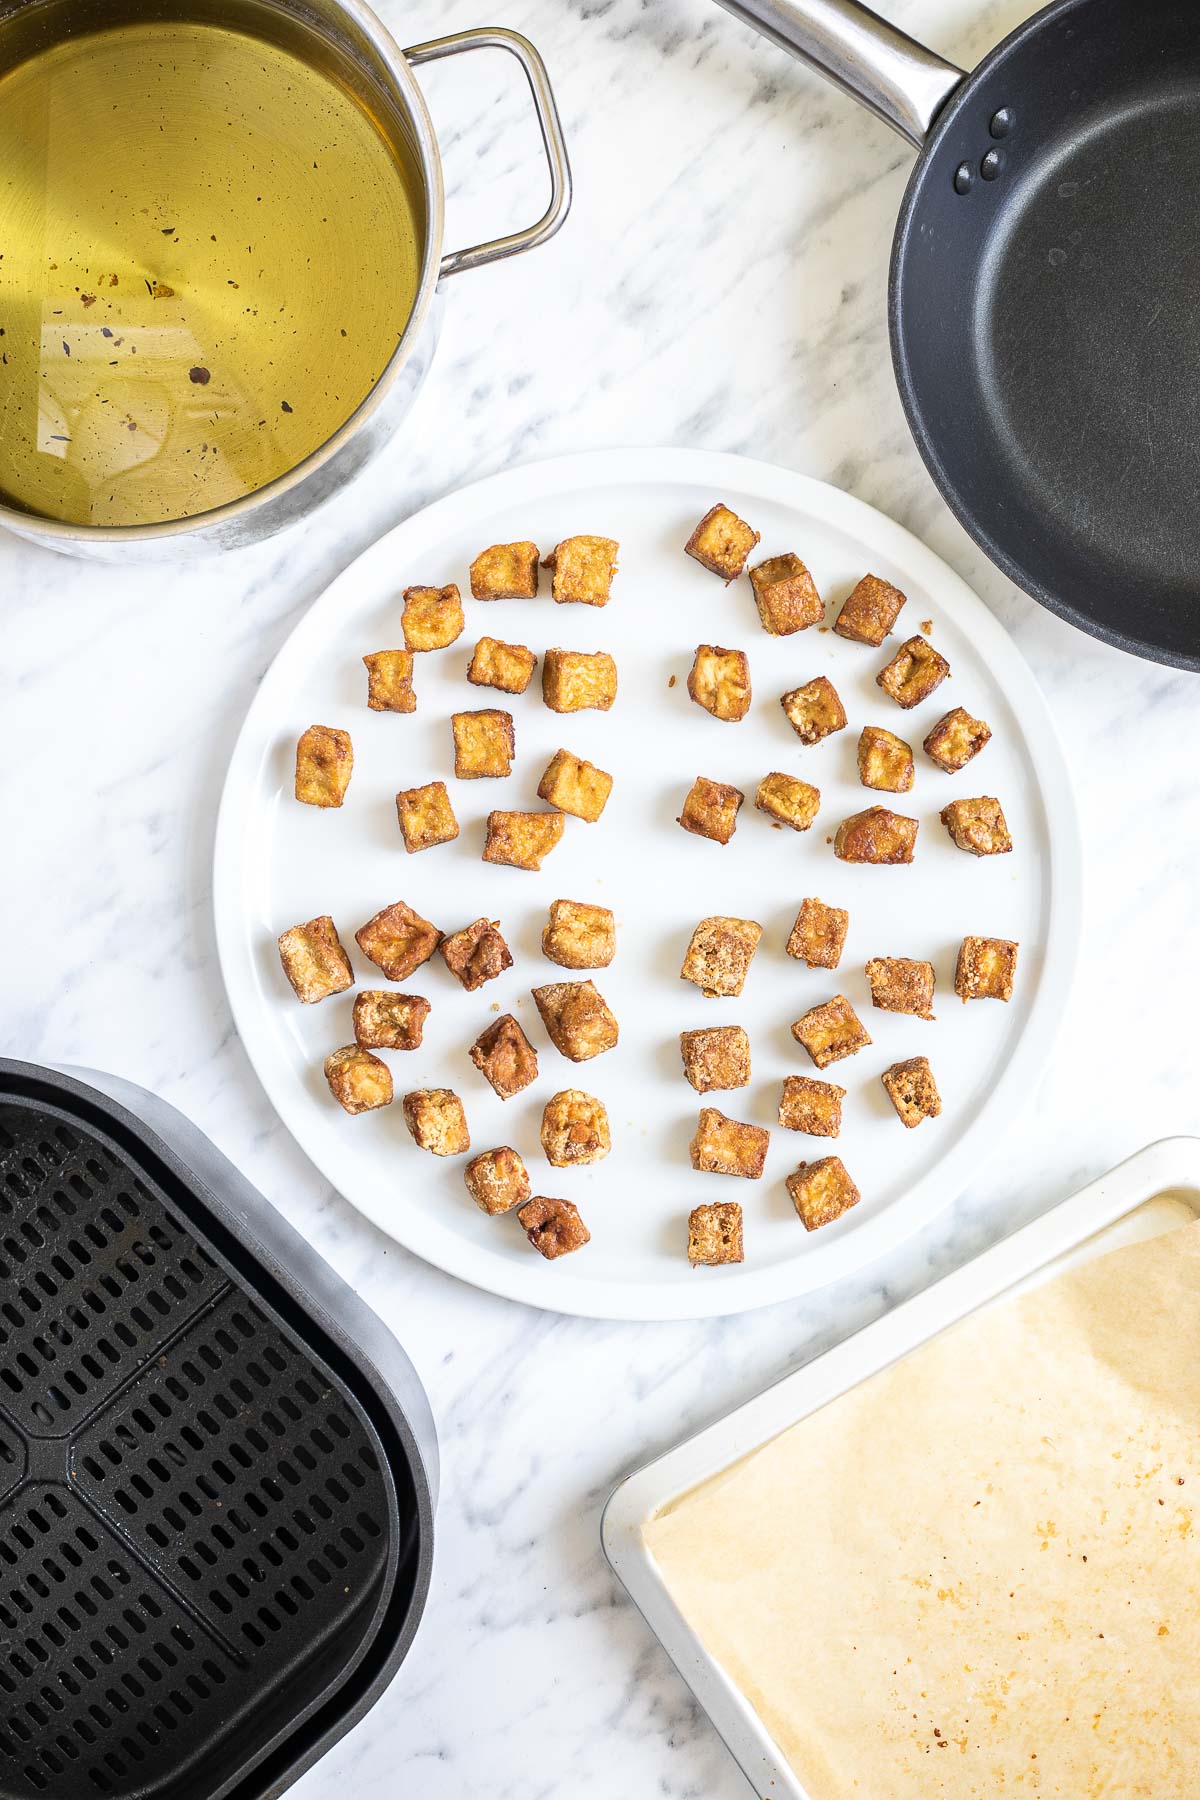 Crispy brown tofu cubes on a large round plate. The corners there are an air fryer, frying pan, baking sheet and pot full of oil that refers to the 4 methods of getting crispy tofu